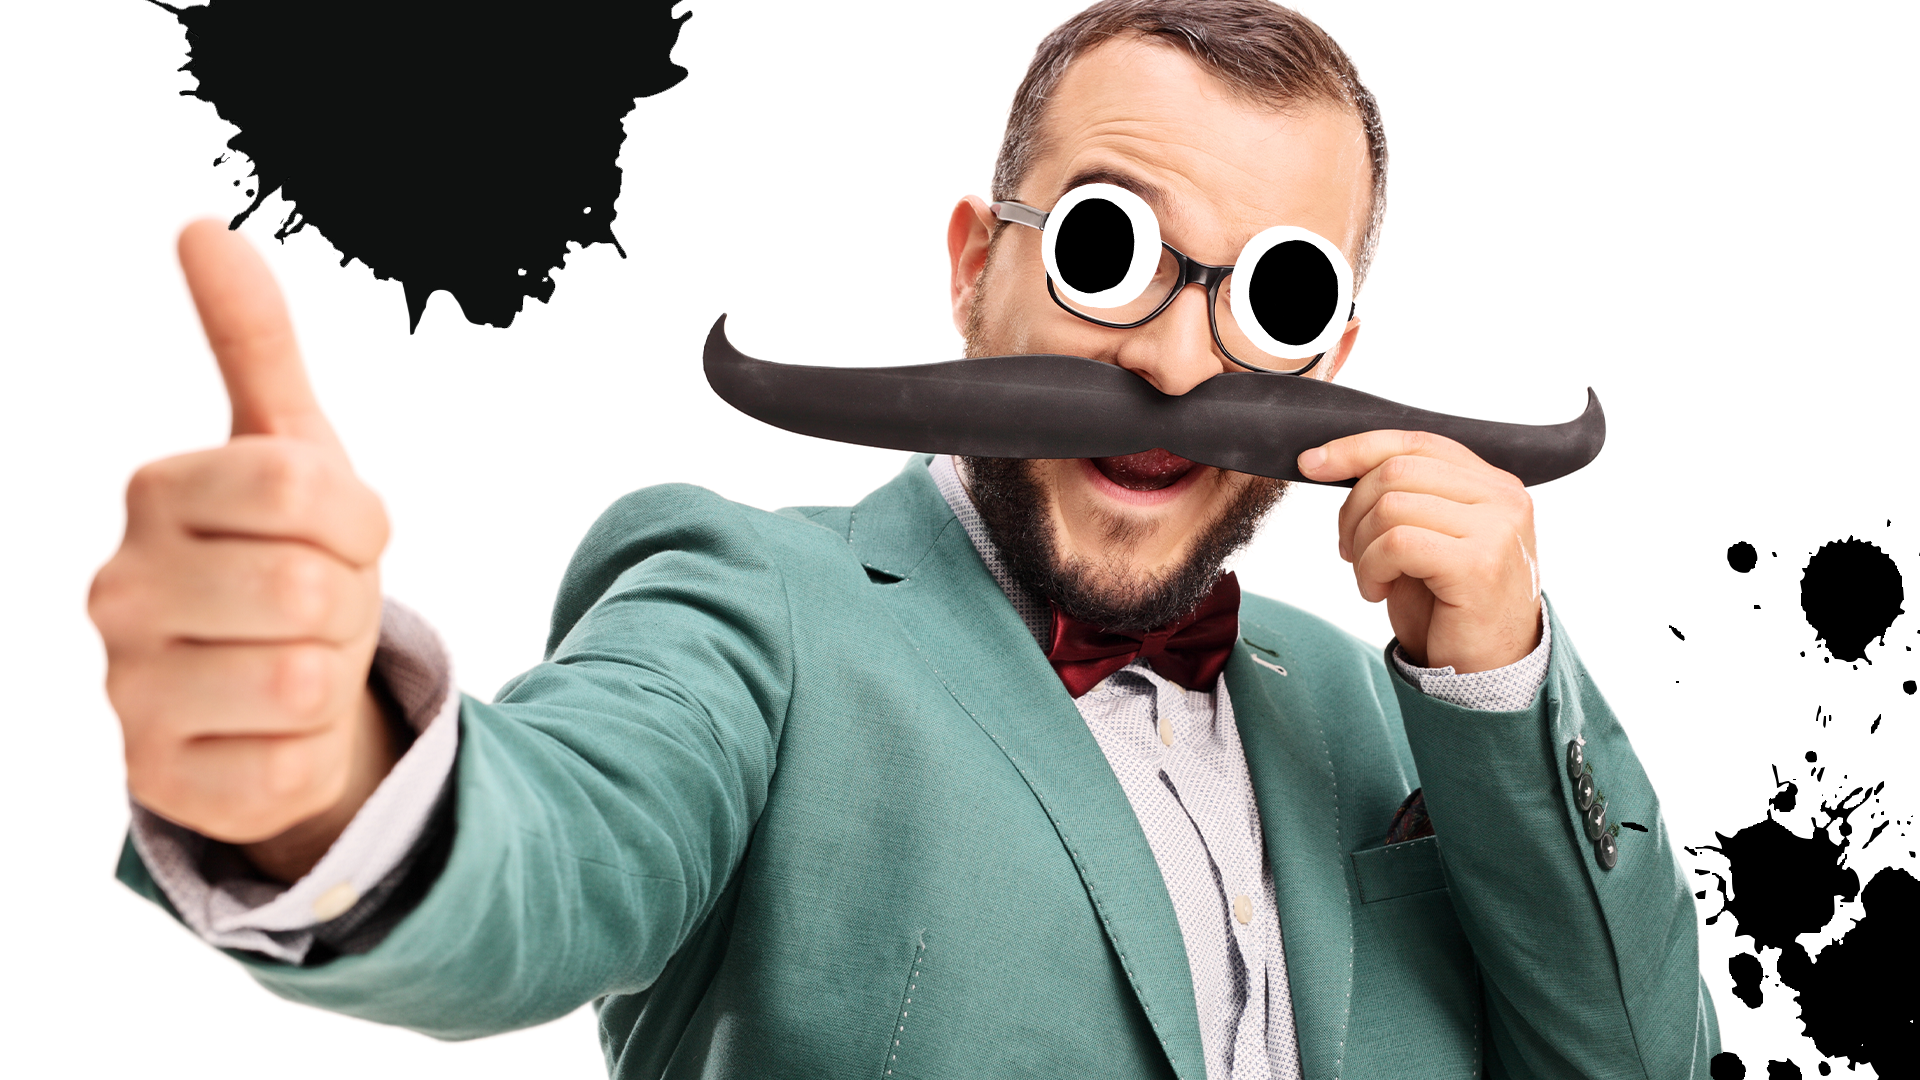 Man with goofy moustache and splats